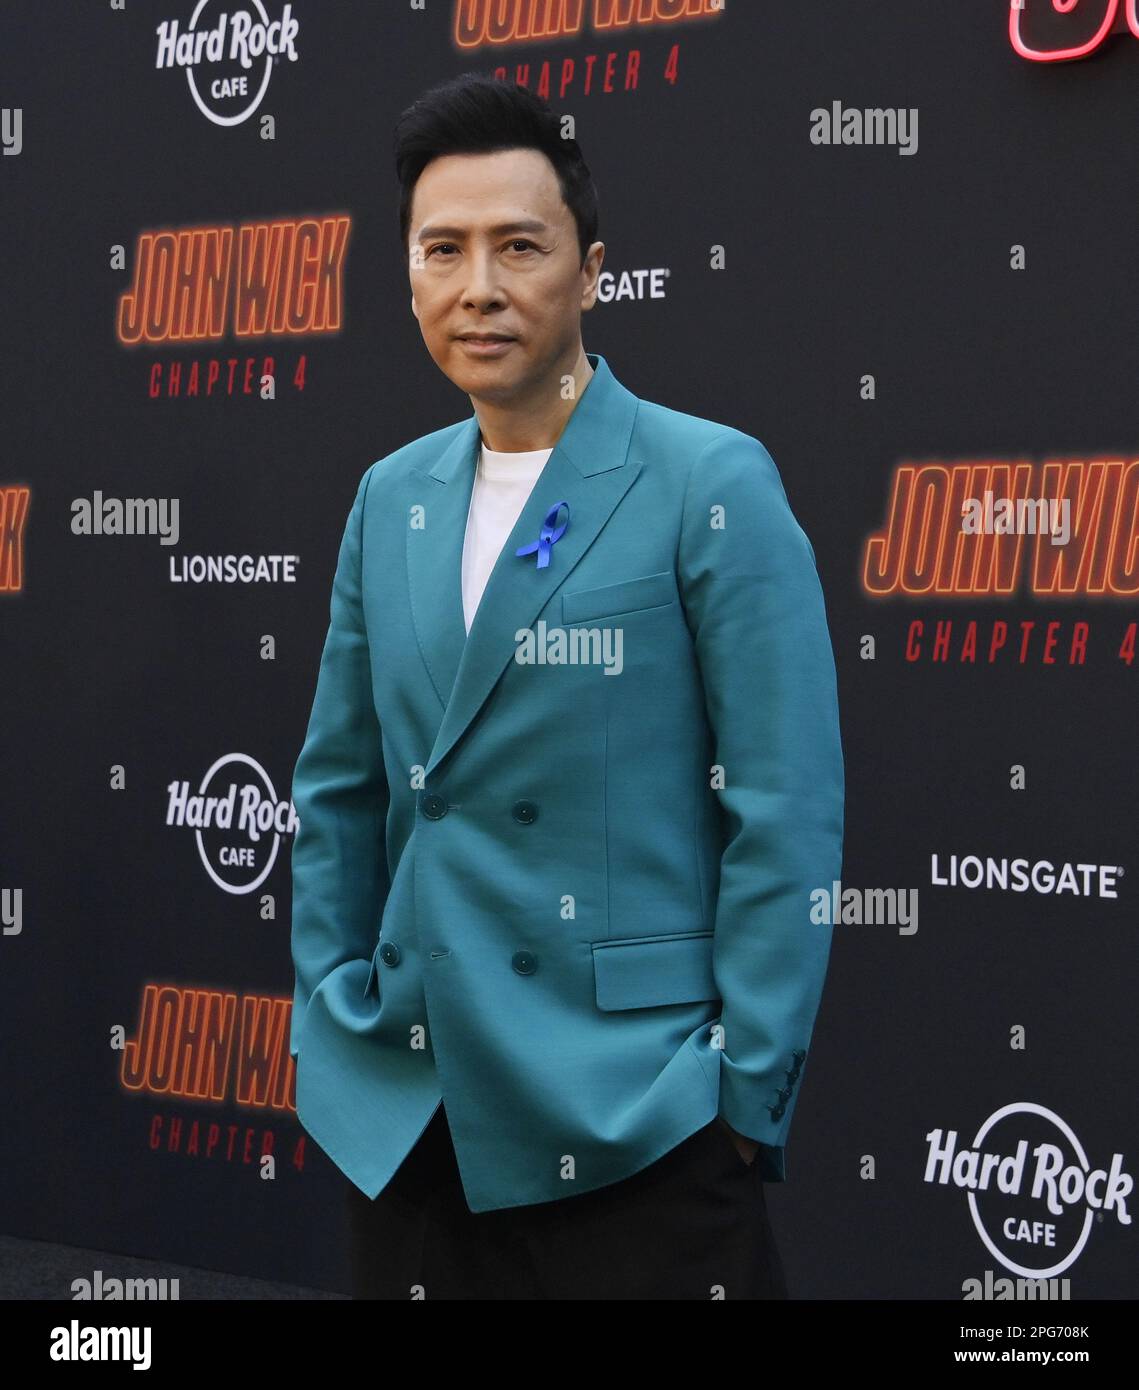 Donnie Yen Joins Keanu Reeves In 'John Wick 4' At Lionsgate – Deadline